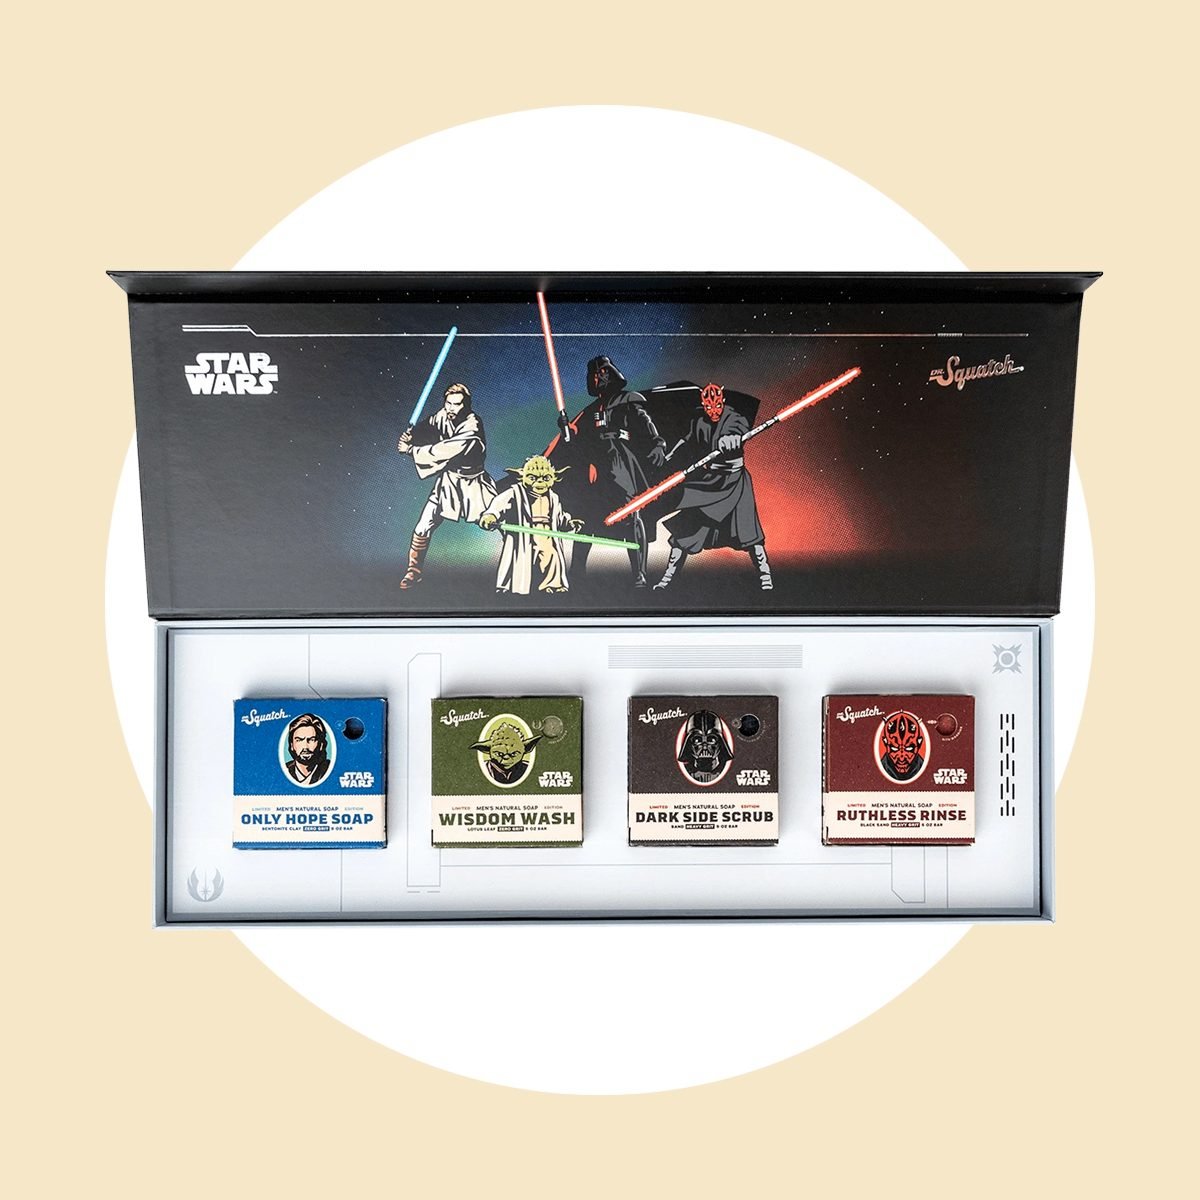 The Best Star Wars Gifts in the Galaxy: 37 Items to Buy in 2022